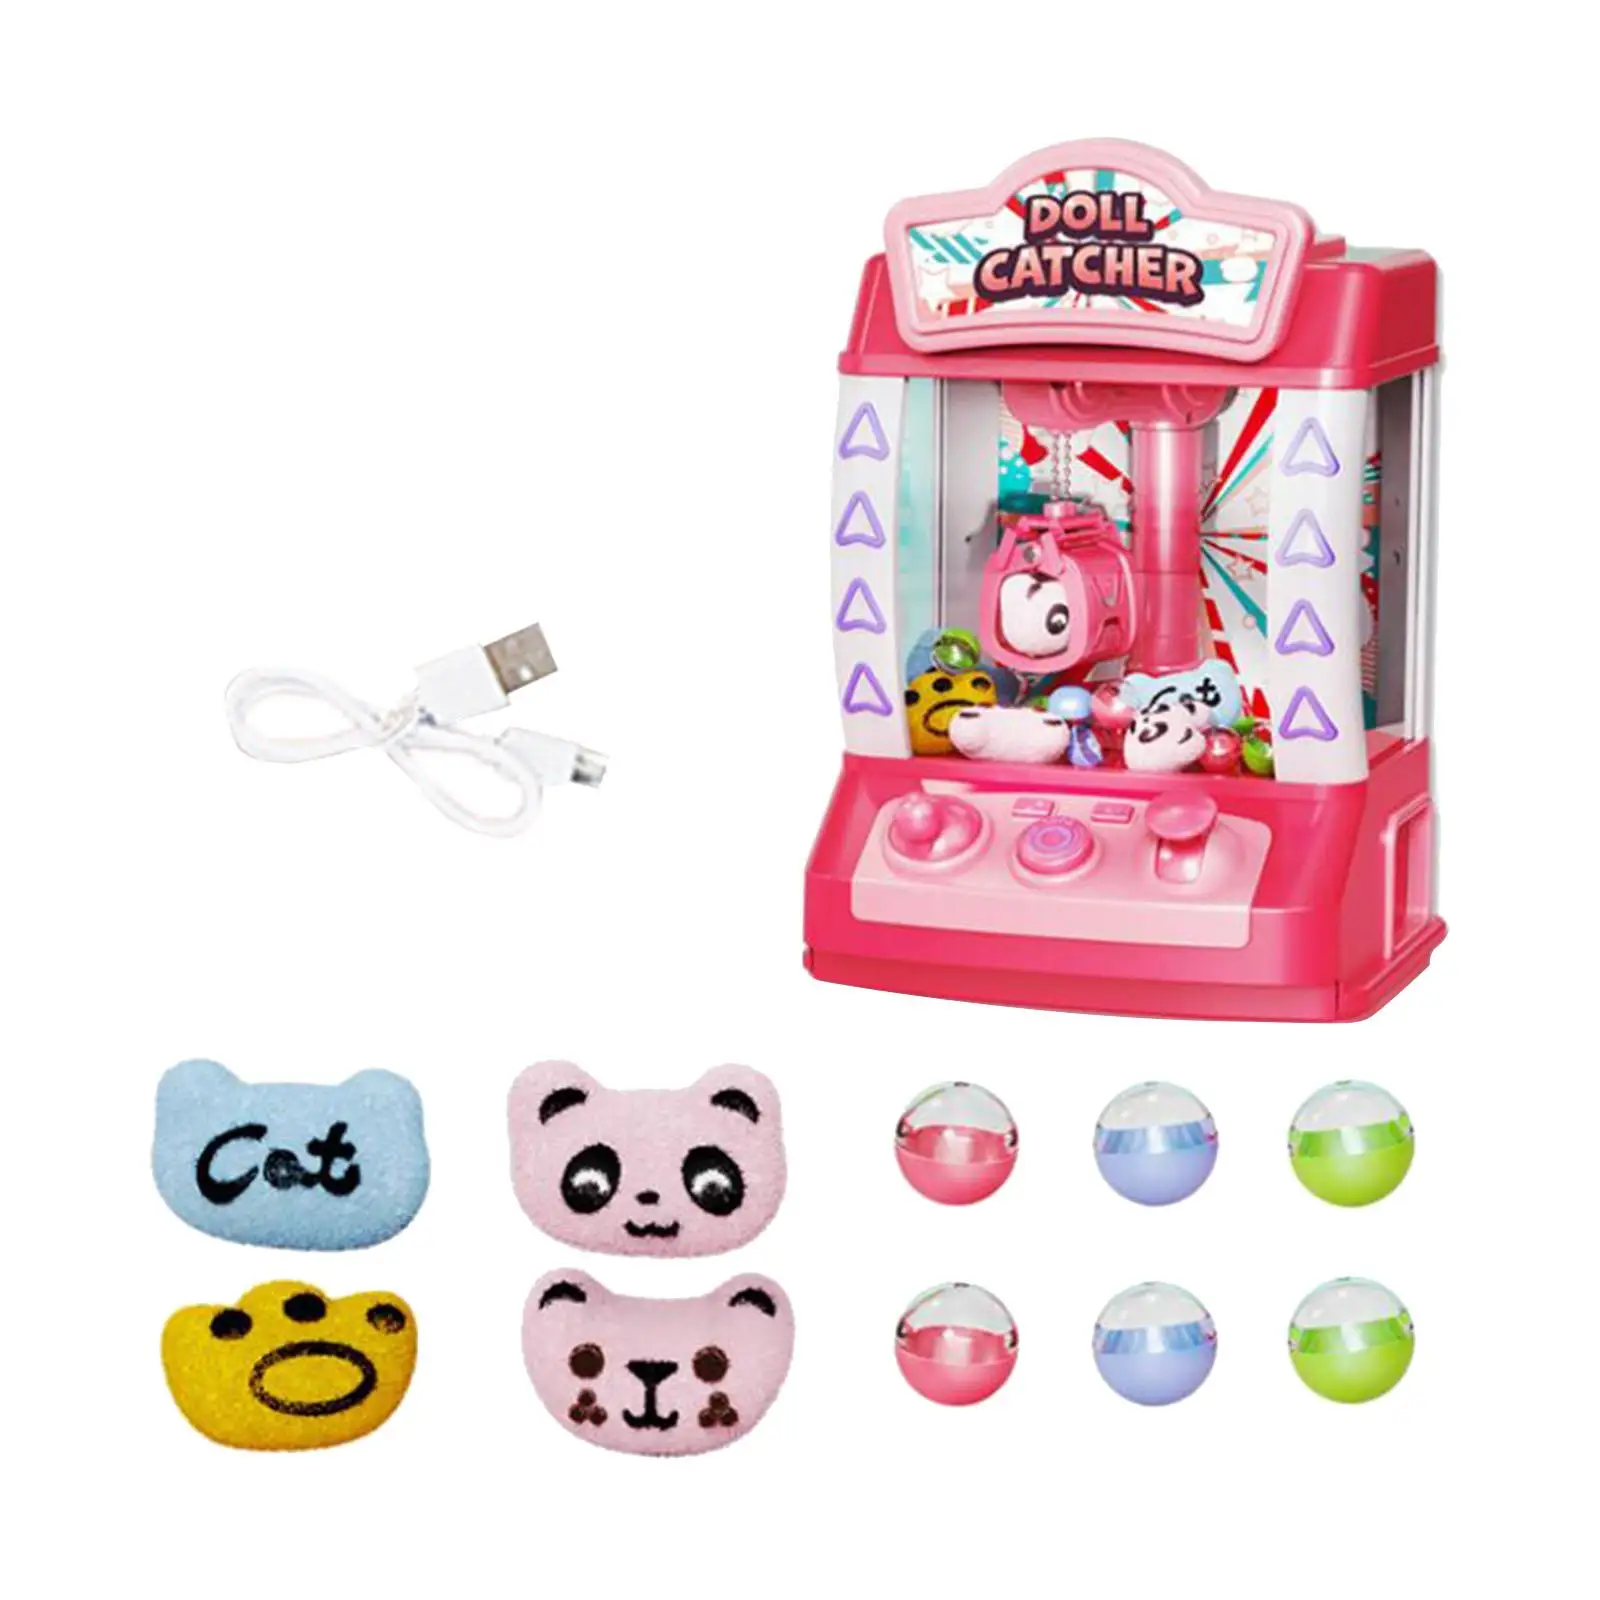 Claw Machine with Capsule and Dolls Birthday Gifts Arcade Candy Capsule Claw Game Prizes Toy for Adults Home Toddlers Kids